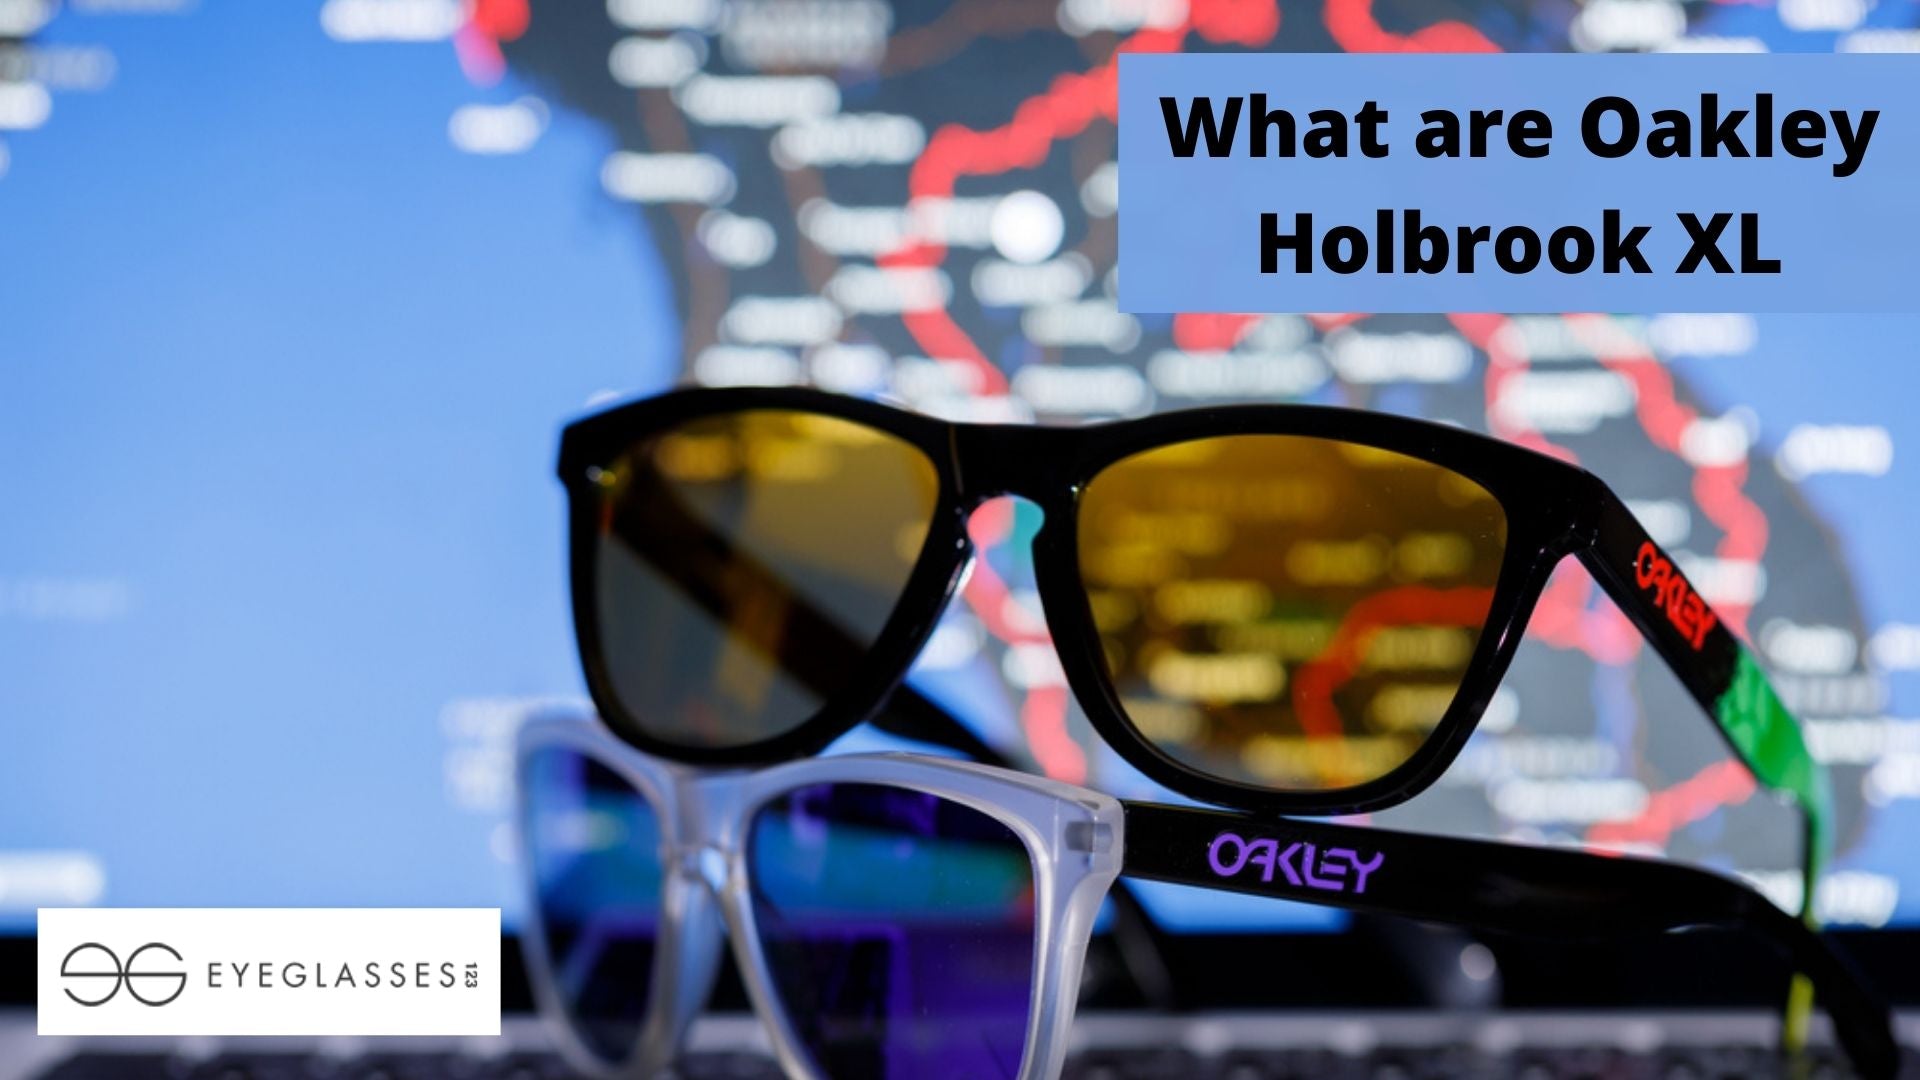 What are Oakley Holbrook XL